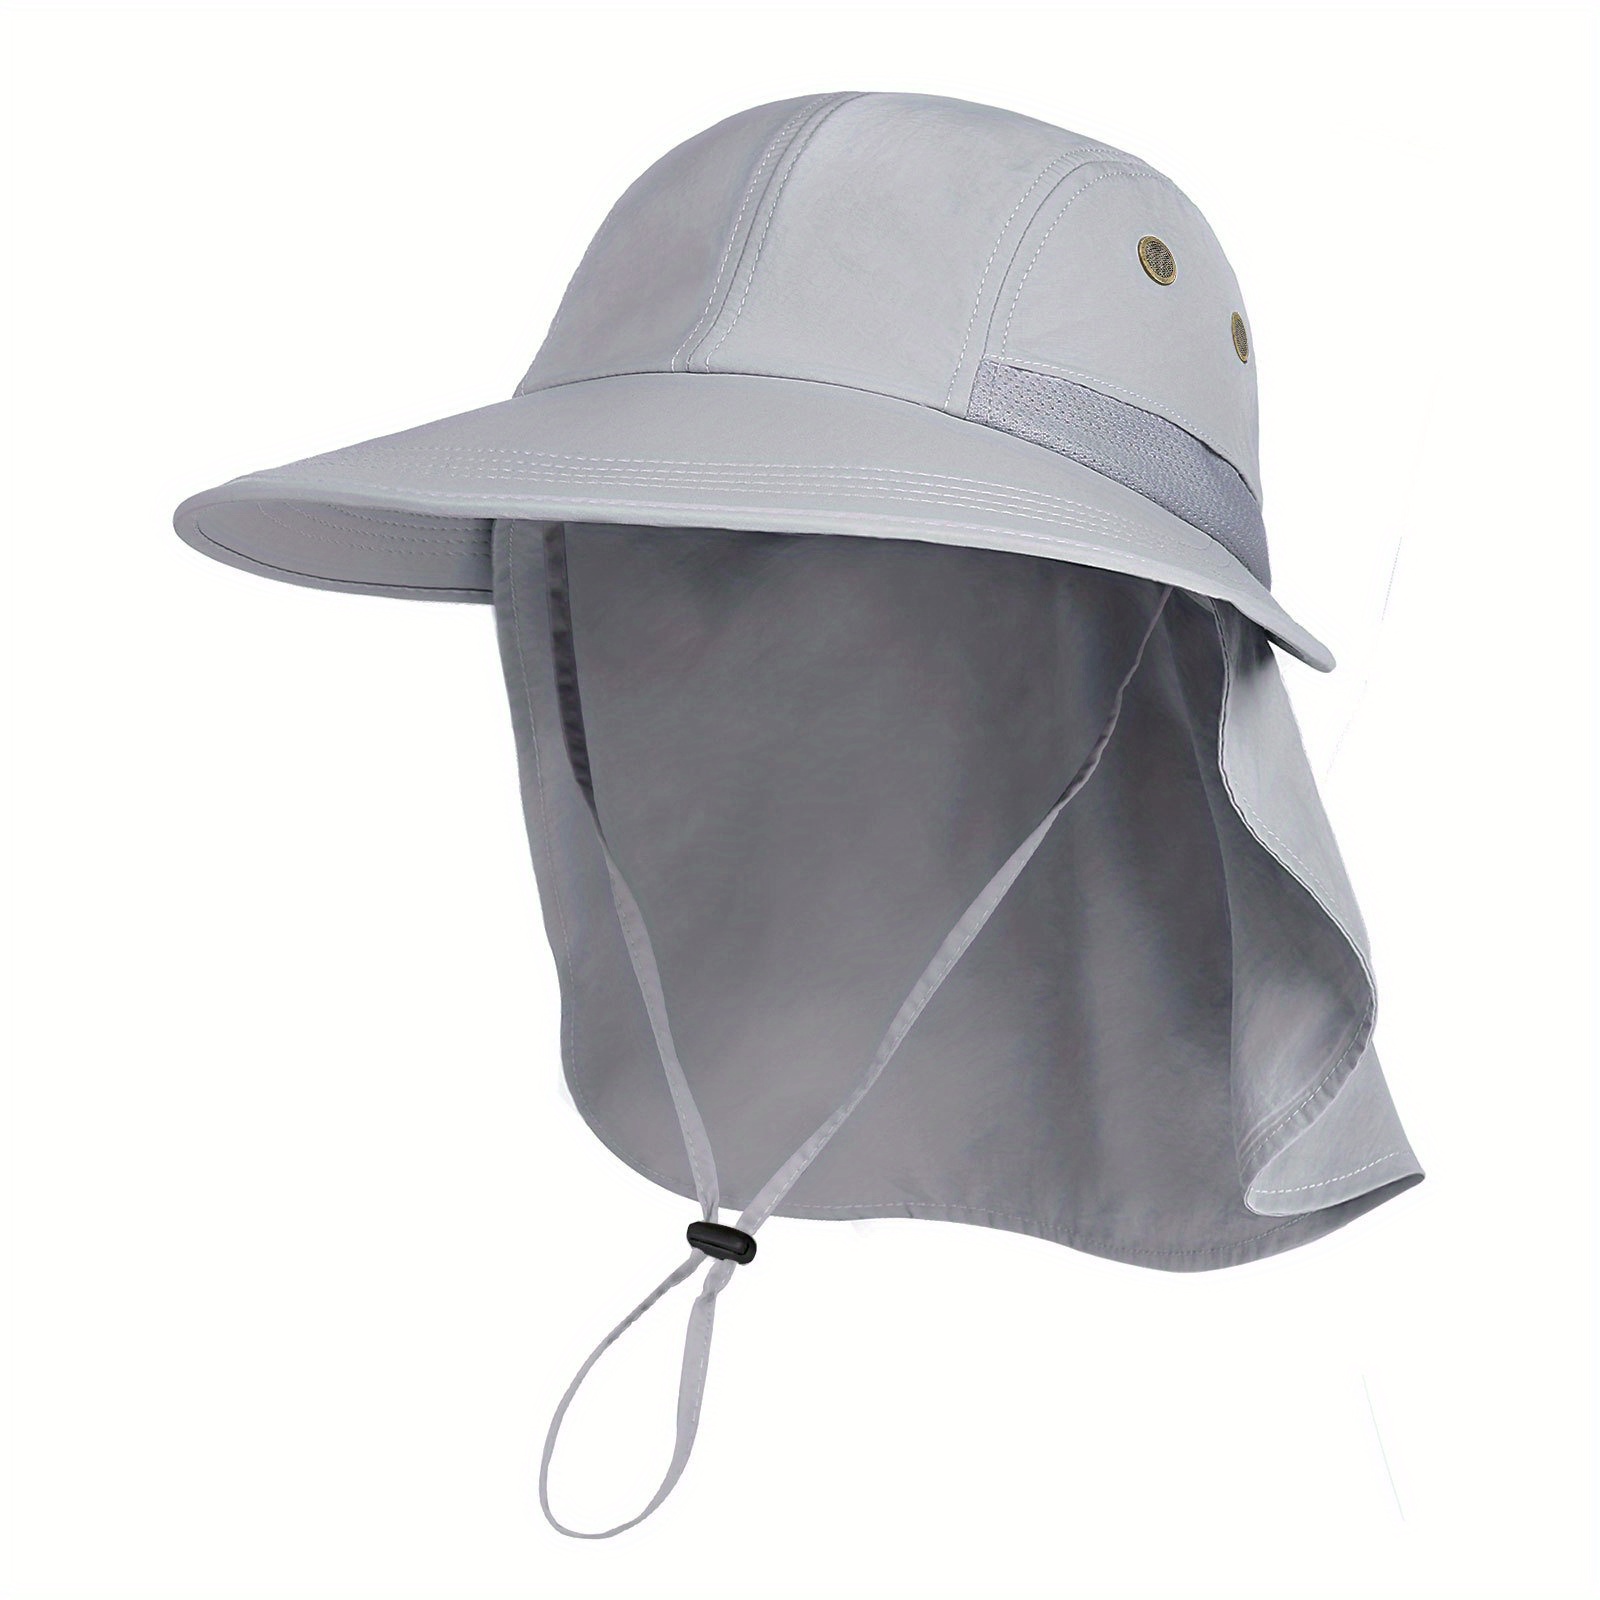 Men's Fishing hat Wide Brim Sun Protection Hat with Breathable Safari hat  and Fisherman hat Hiking Hats Boonie Hats for Man 2023